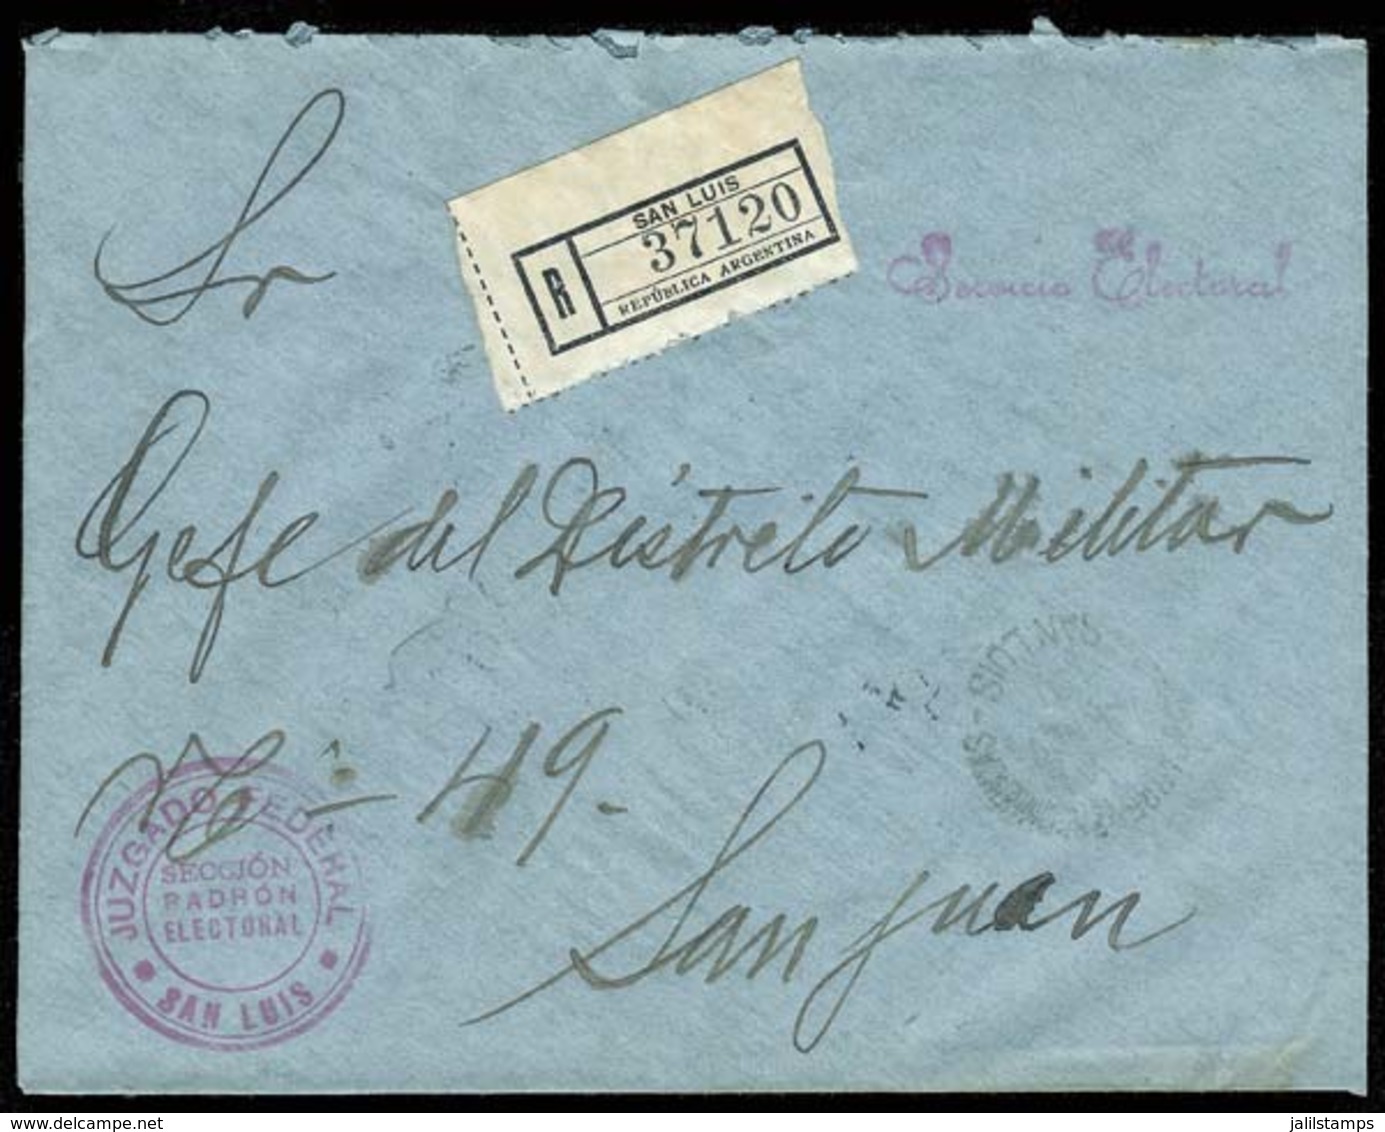 ARGENTINA: Official Cover With Postal Franchise Of The "Electoral Service" Sent By Registered Mail From San Luis To San  - Officials